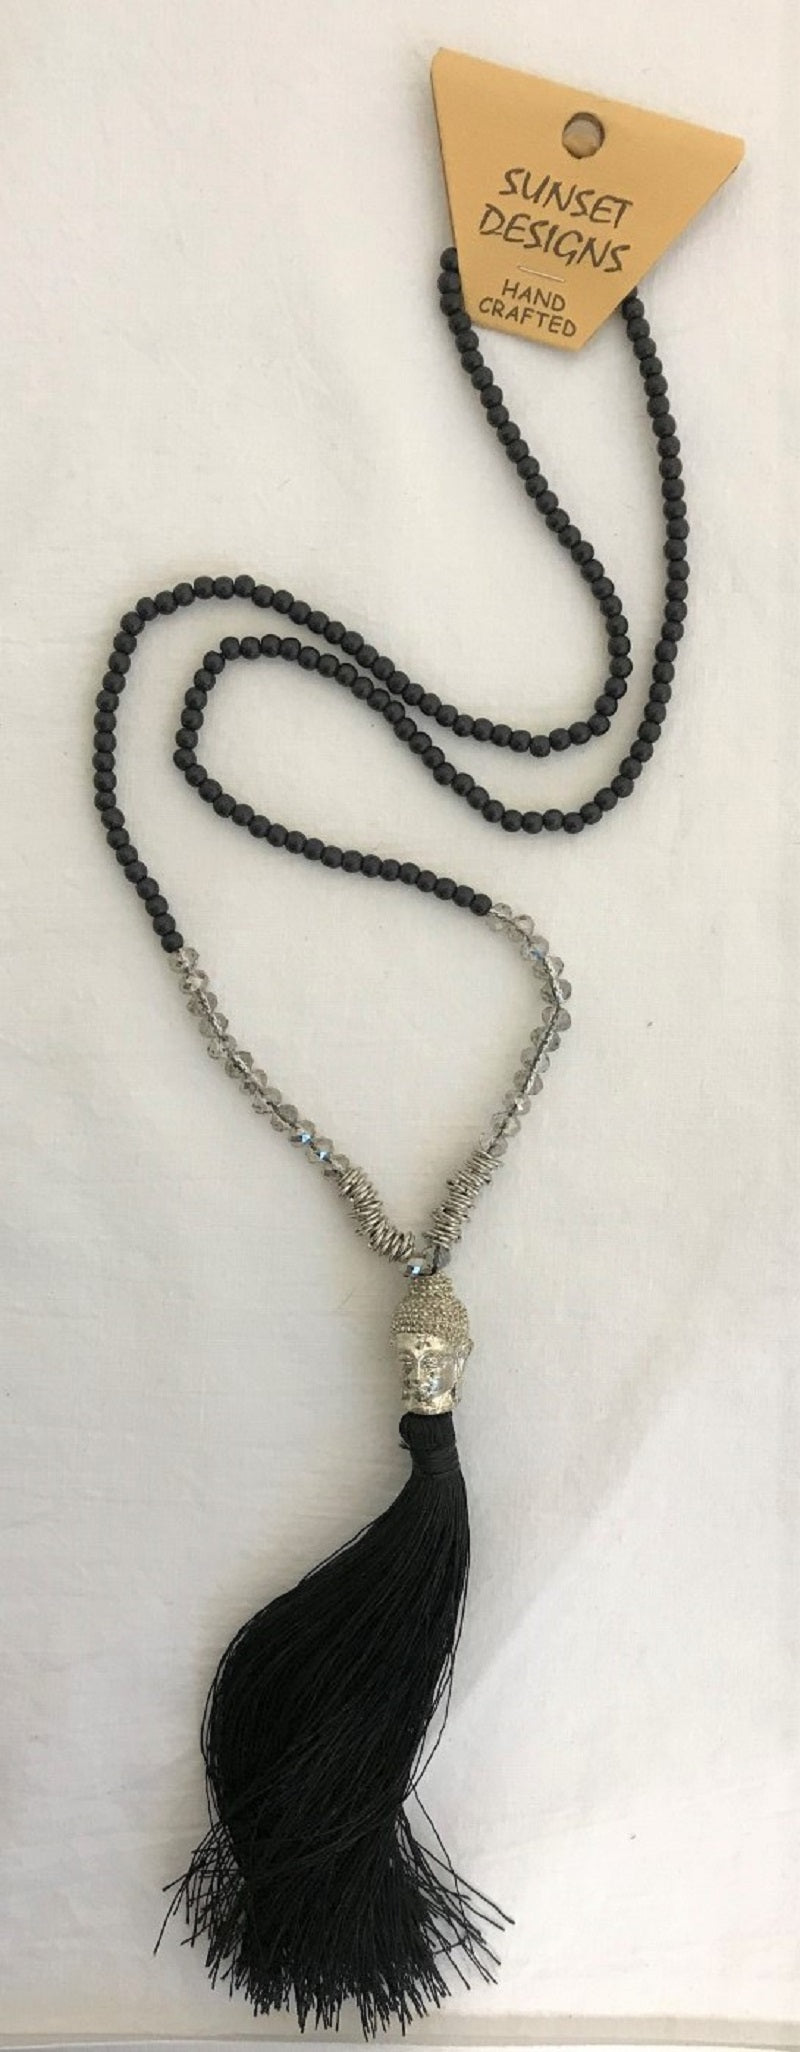 necklace - black - silver budha head - clear crystal/metal ring beads - string tassle